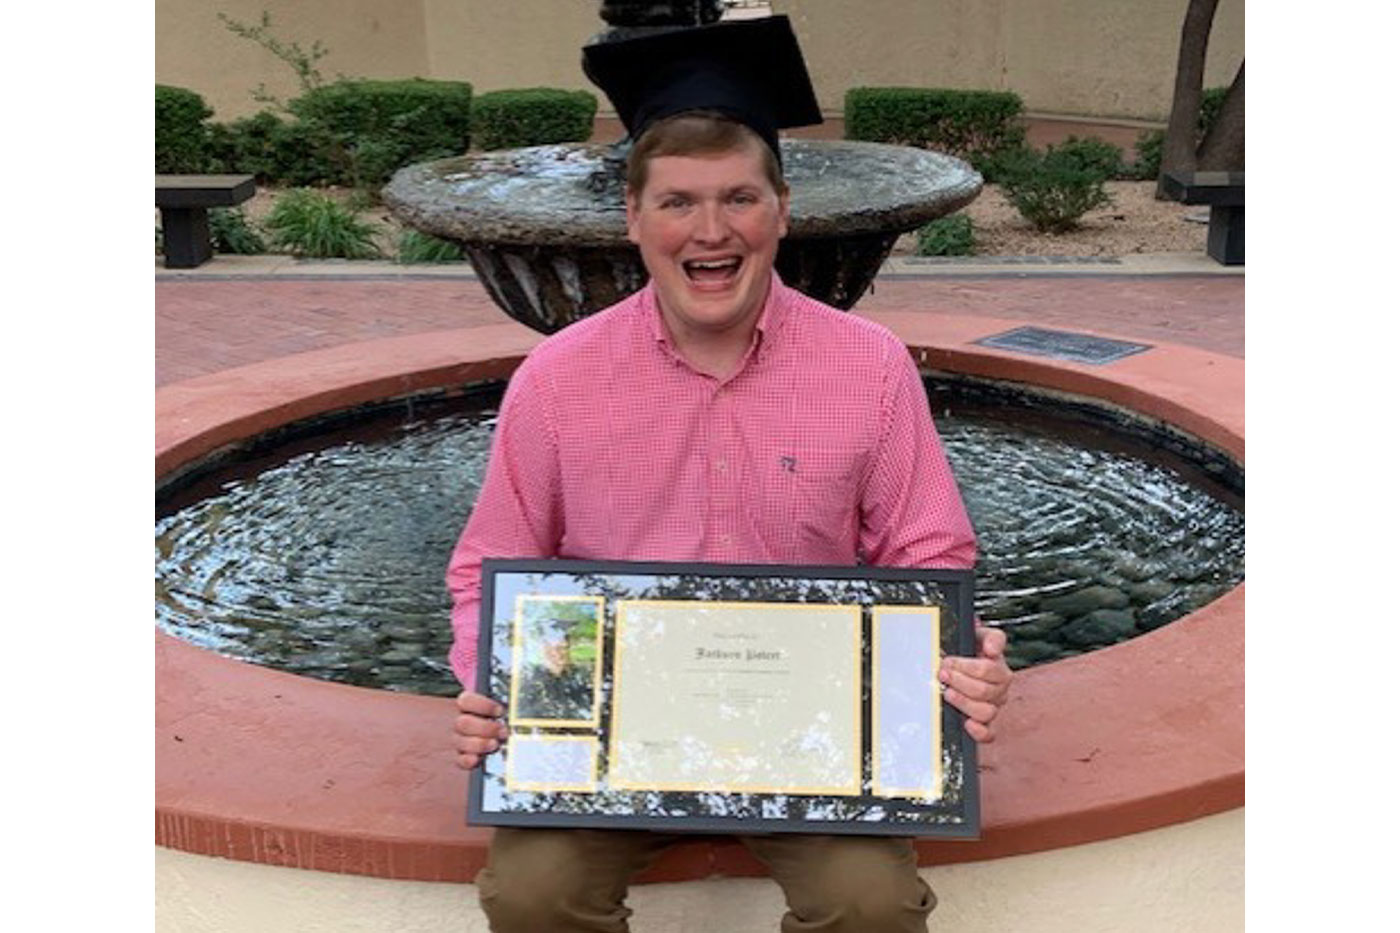 Jackson at the fountain, holding his diploma